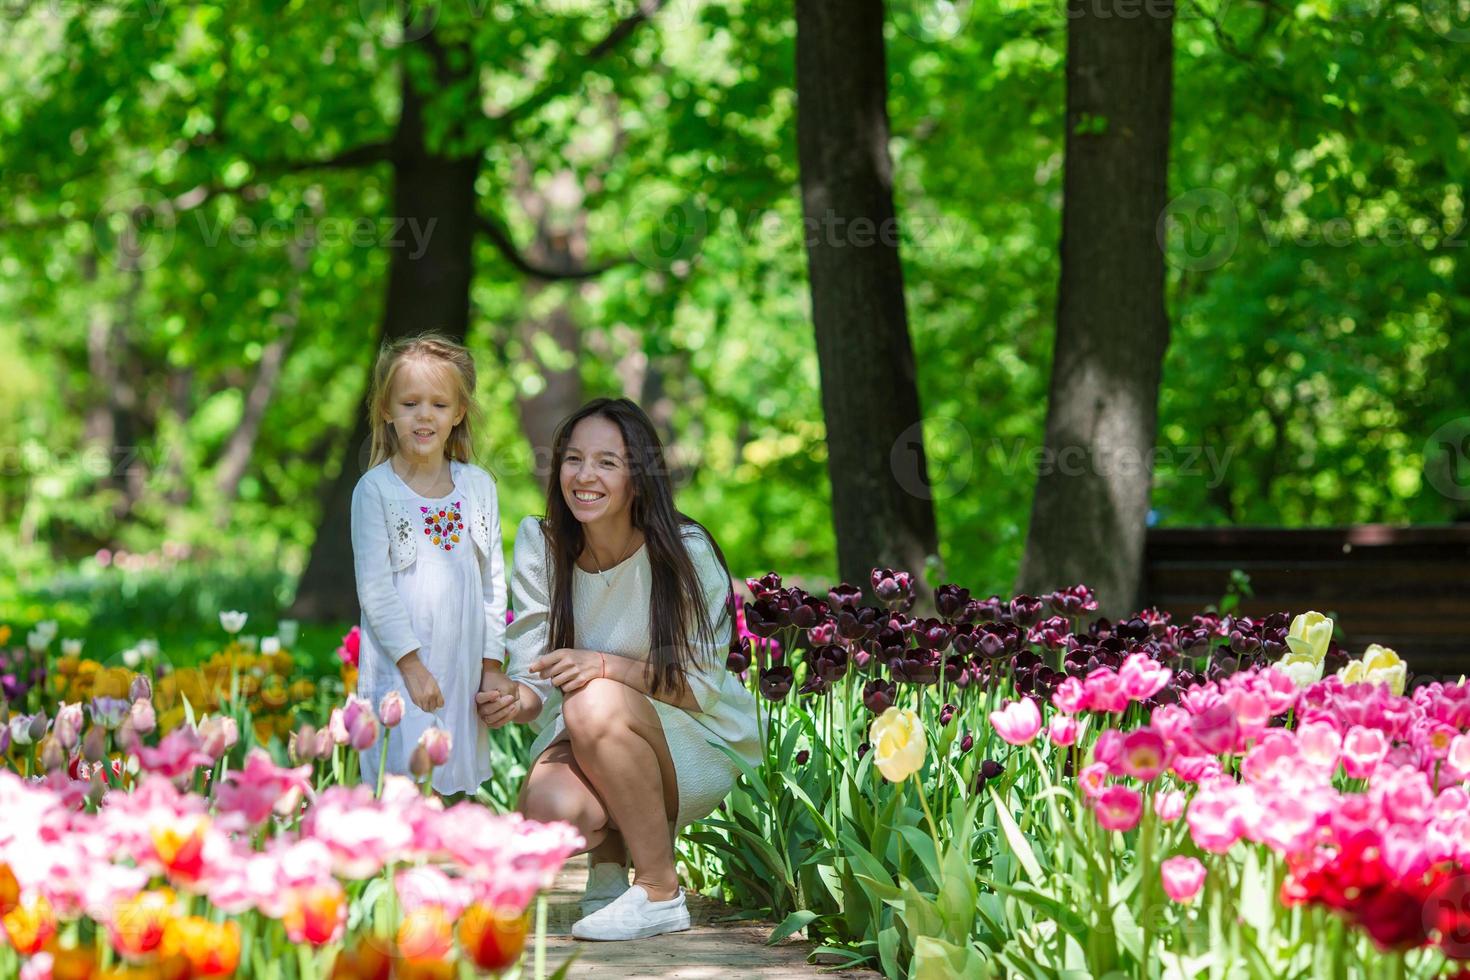 Adorable little girl and young mom enjoying warm day in tulip garden photo